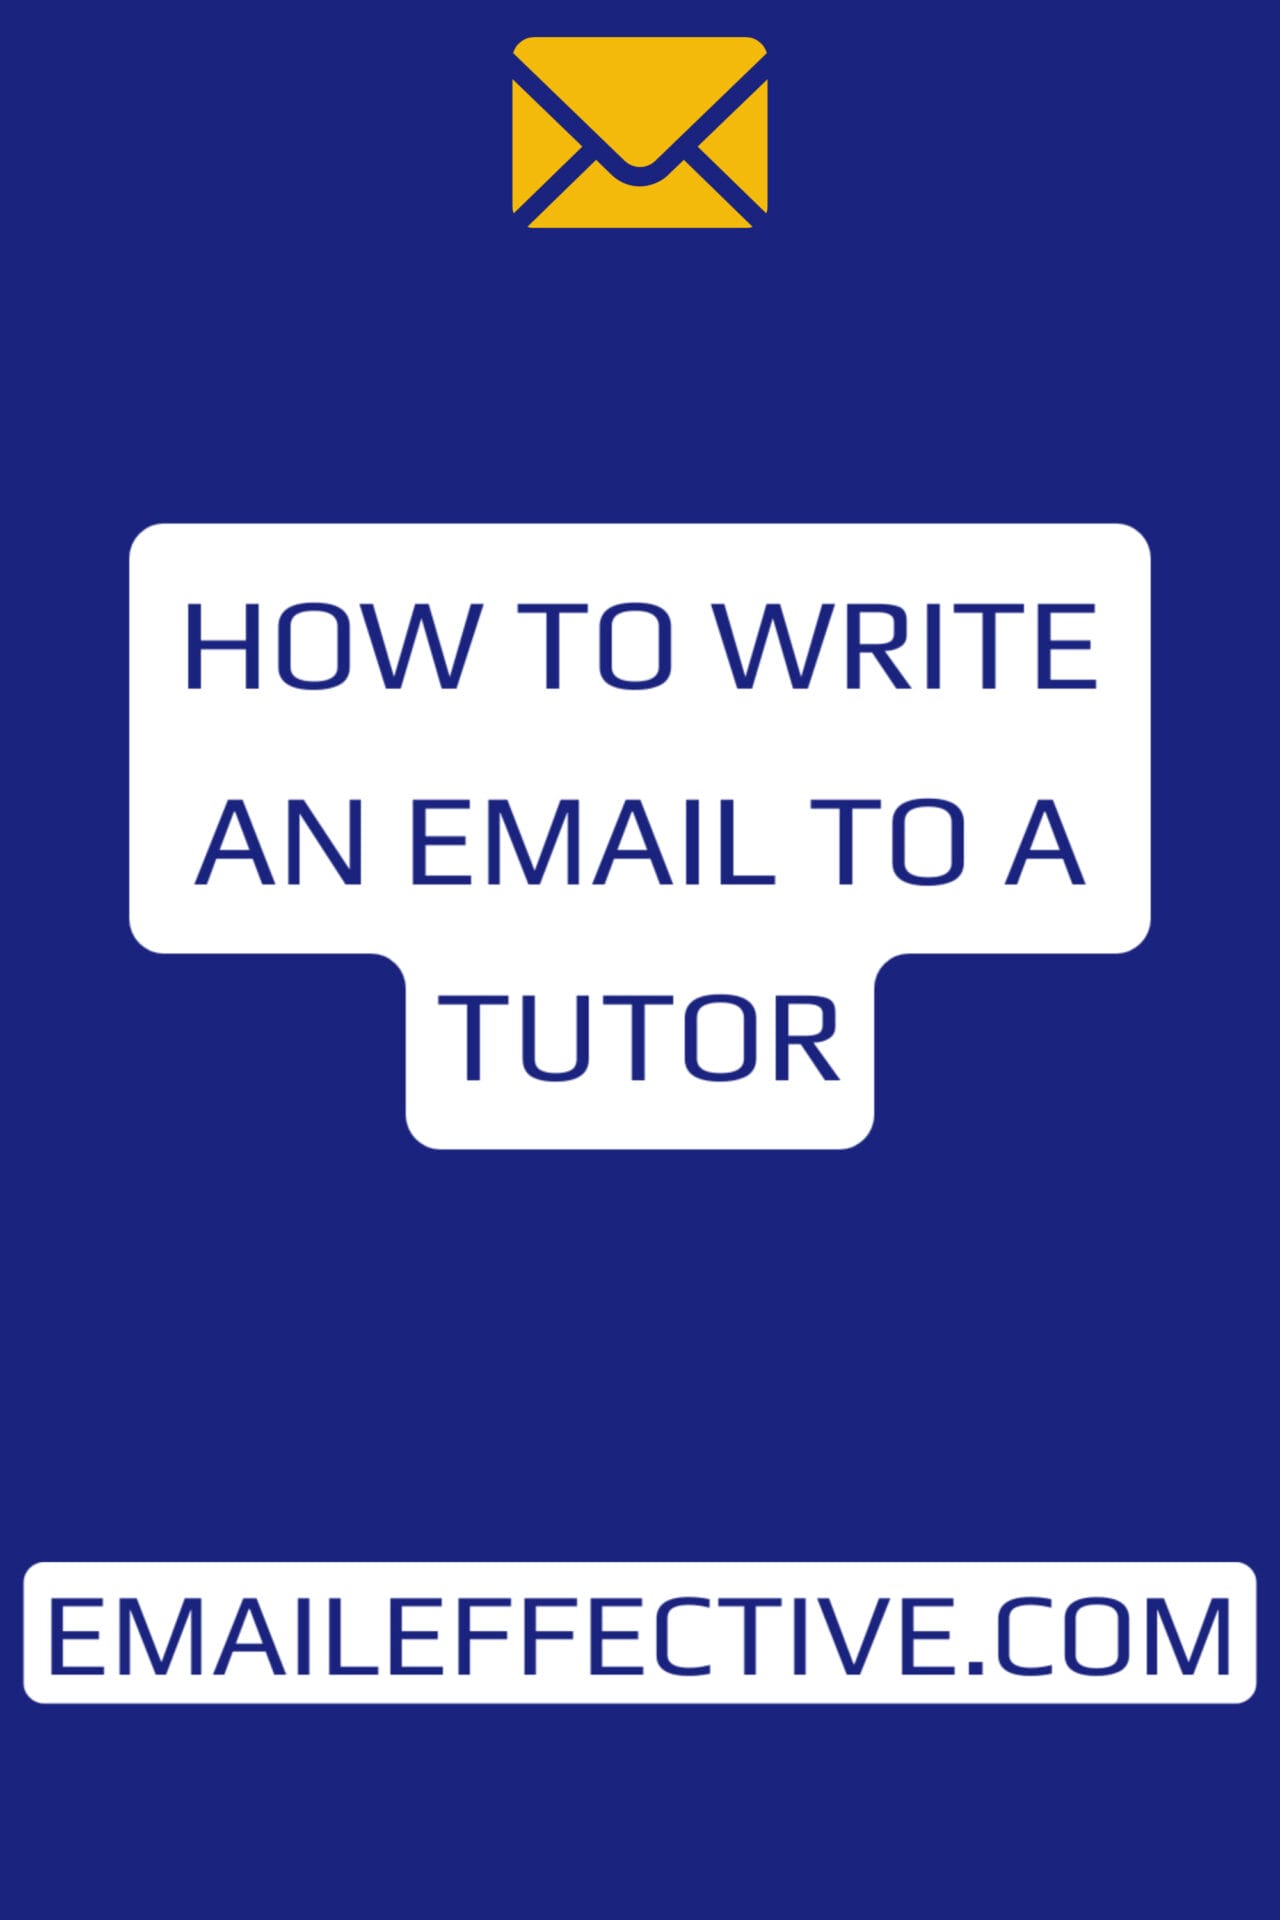 How to Write an Email to a Tutor